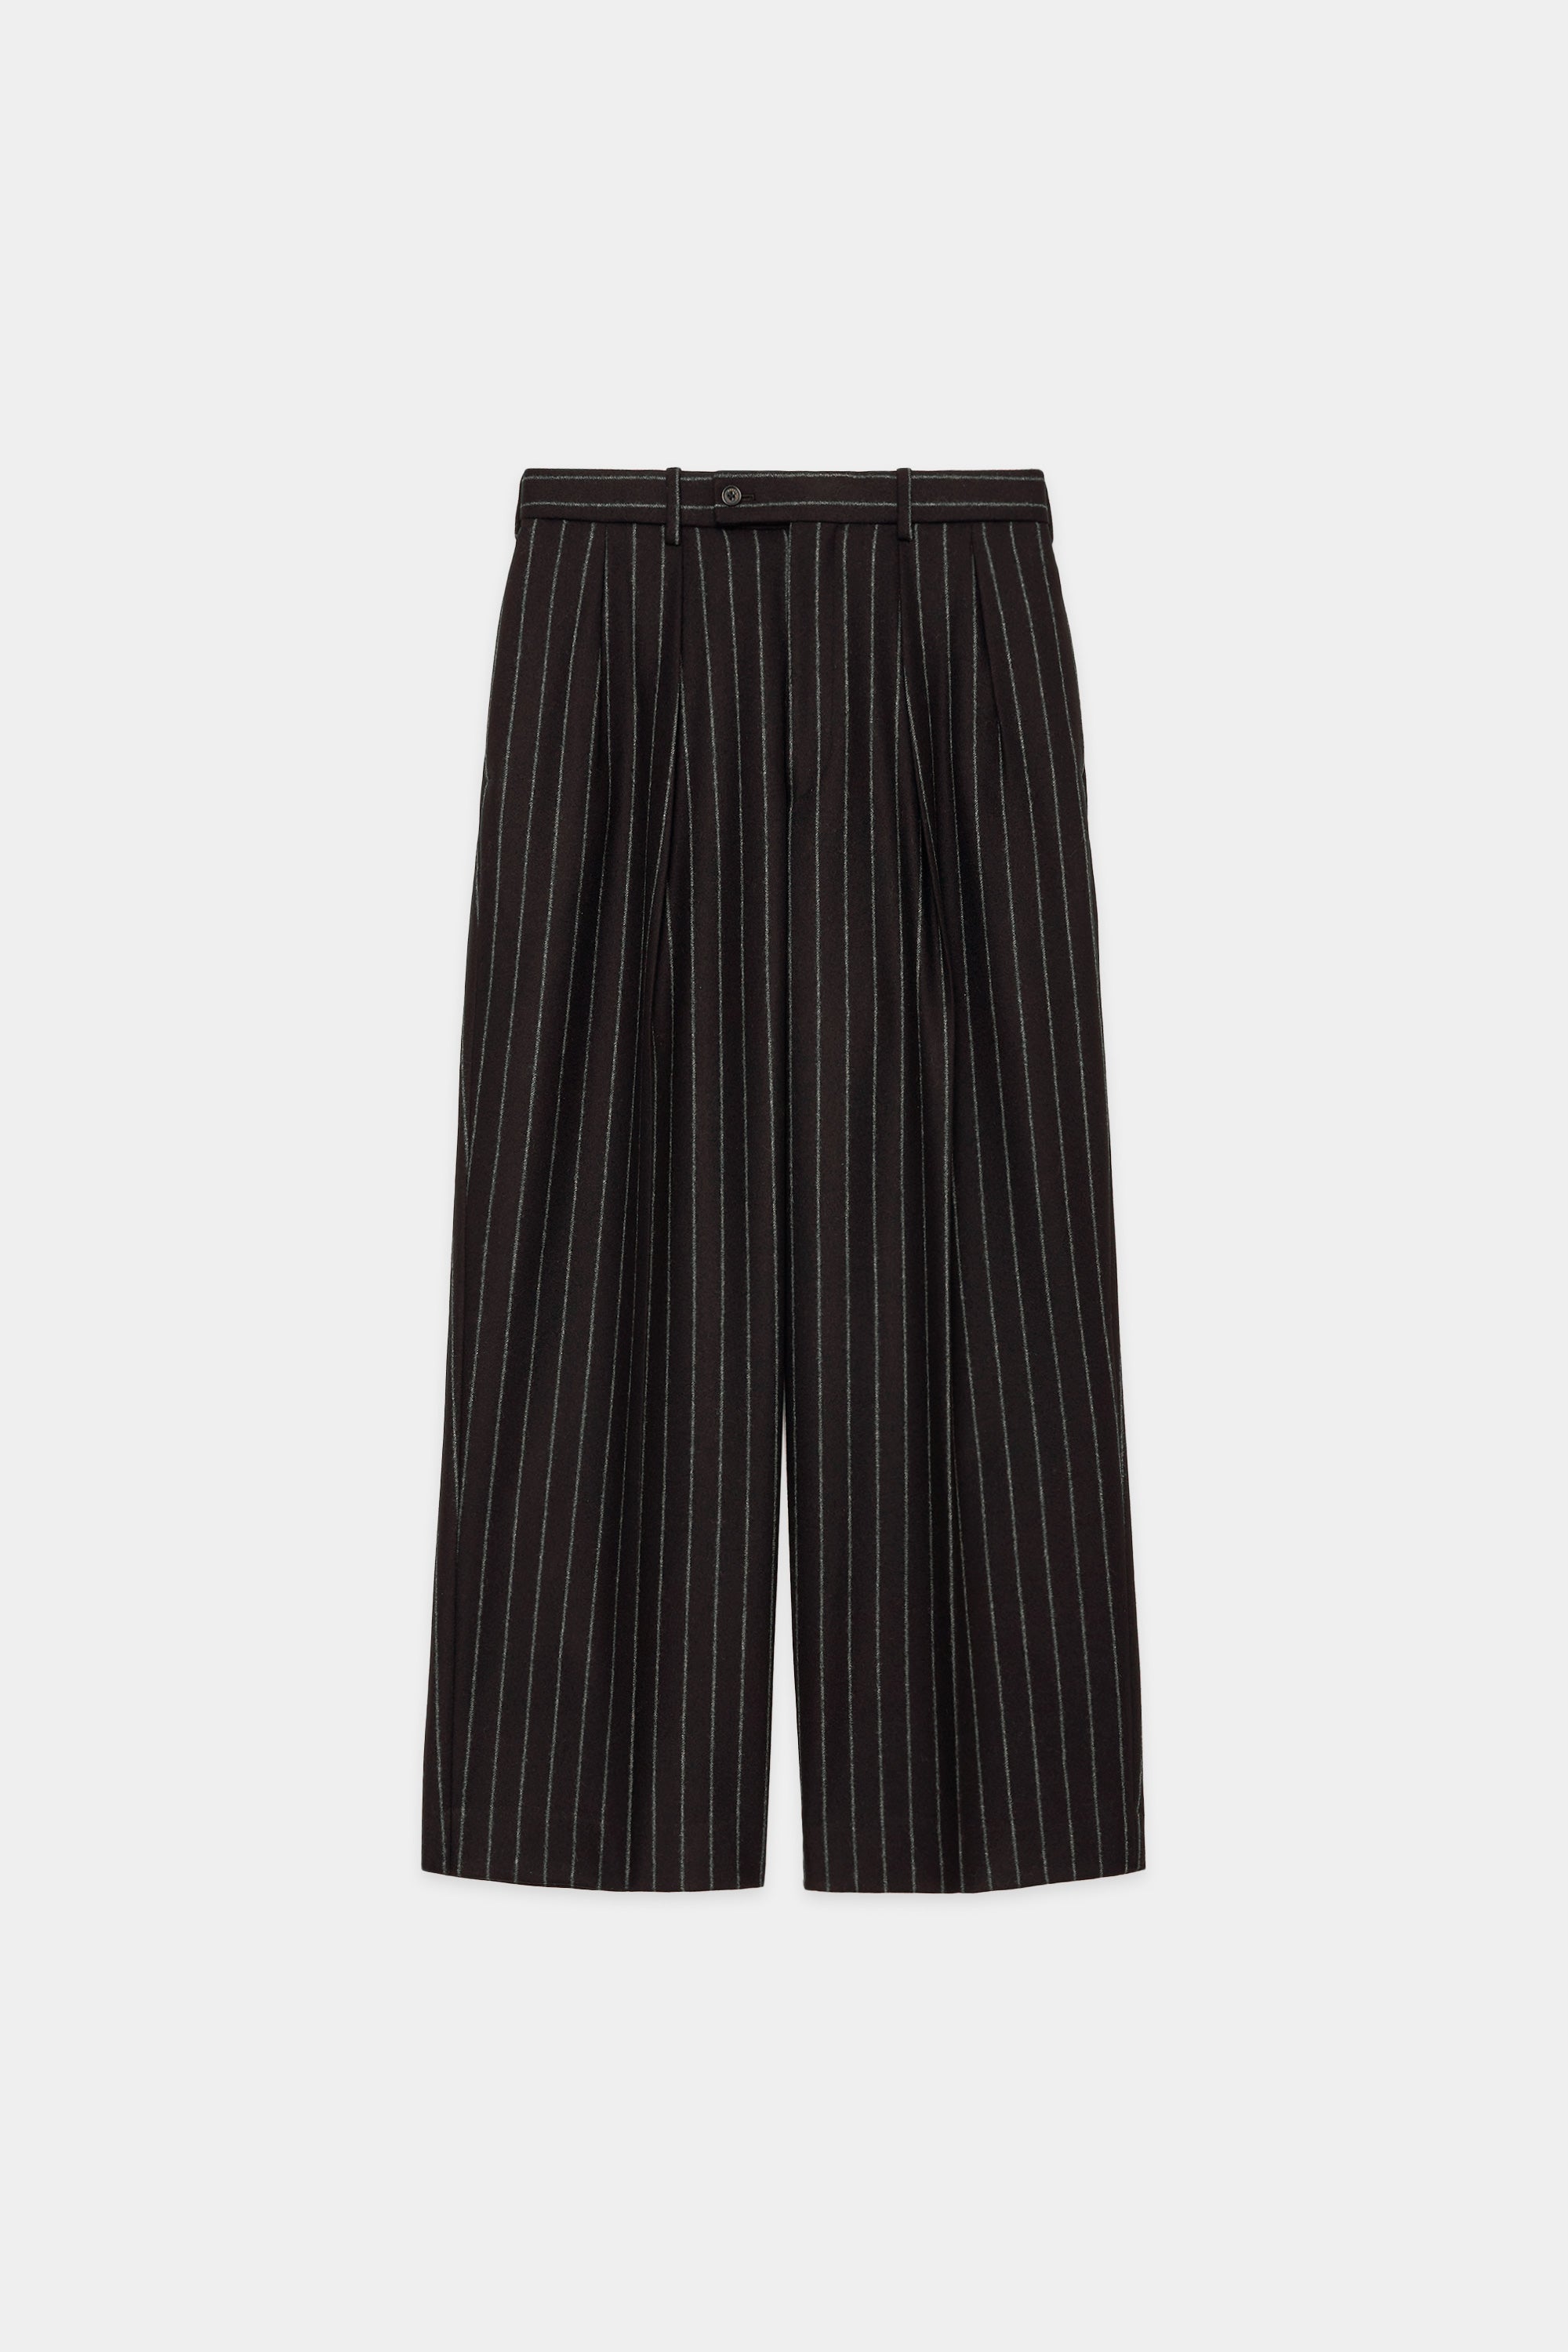 ORGANIC WOOL FLANNEL DOUBLE PLEATED TROUSERS, Brown Stripe